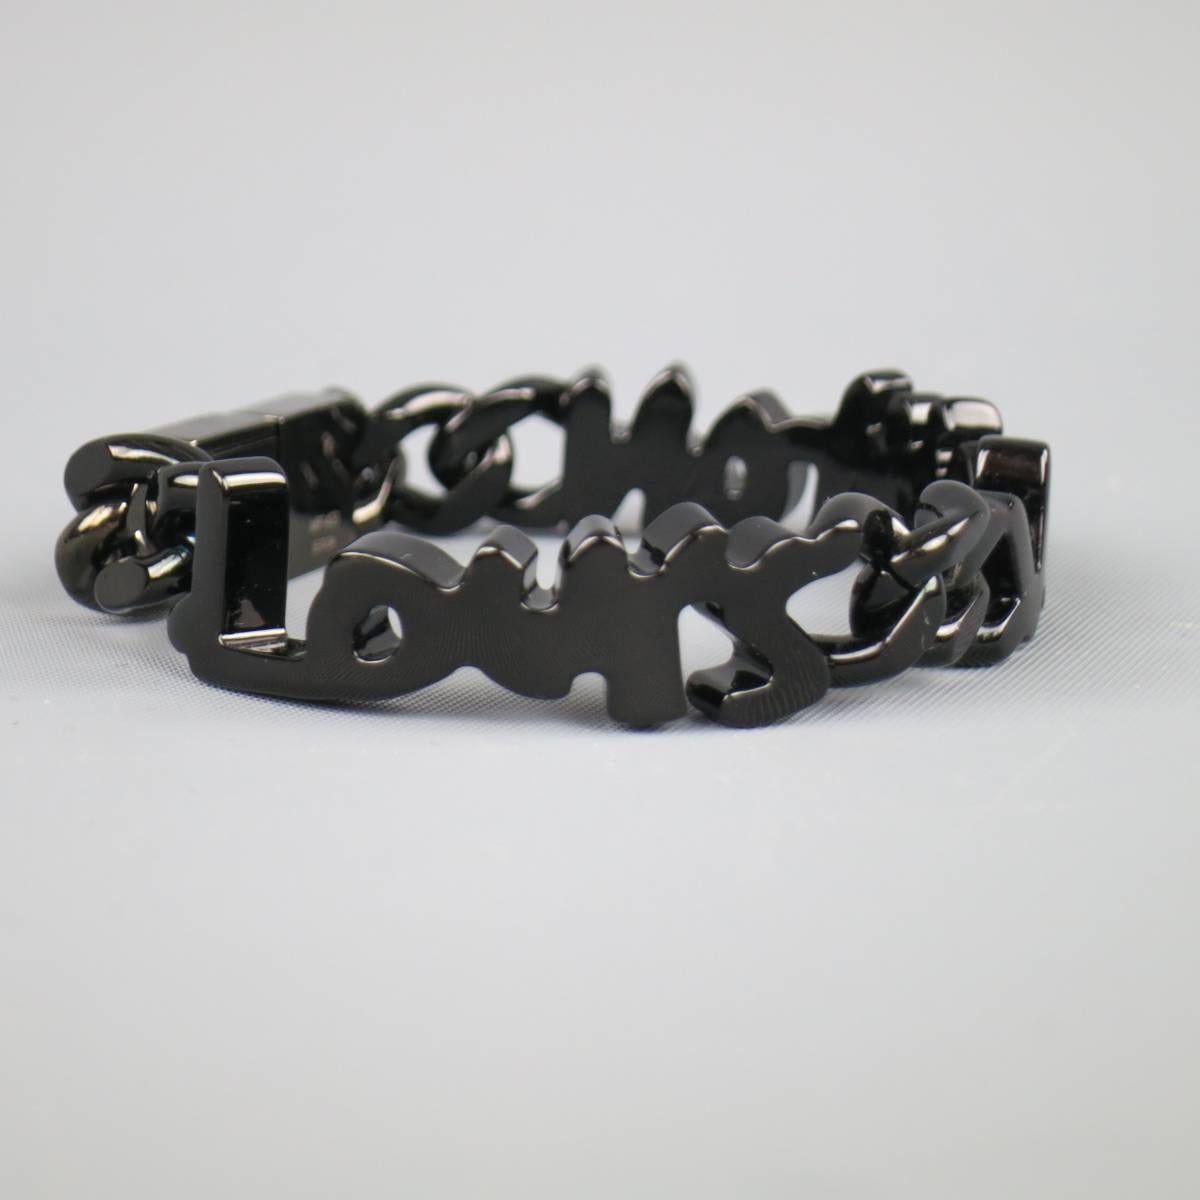 LOUIS VUITTON bracelet in a black metal chair featuring Stephen Sprouse style graffiti logo. With dust bag. Made in Italy. Retails at $705.00.
 
Excellent Pre-Owned Condition.
Marked: MP1403 LE 0134
 
Fits: 6 in.
